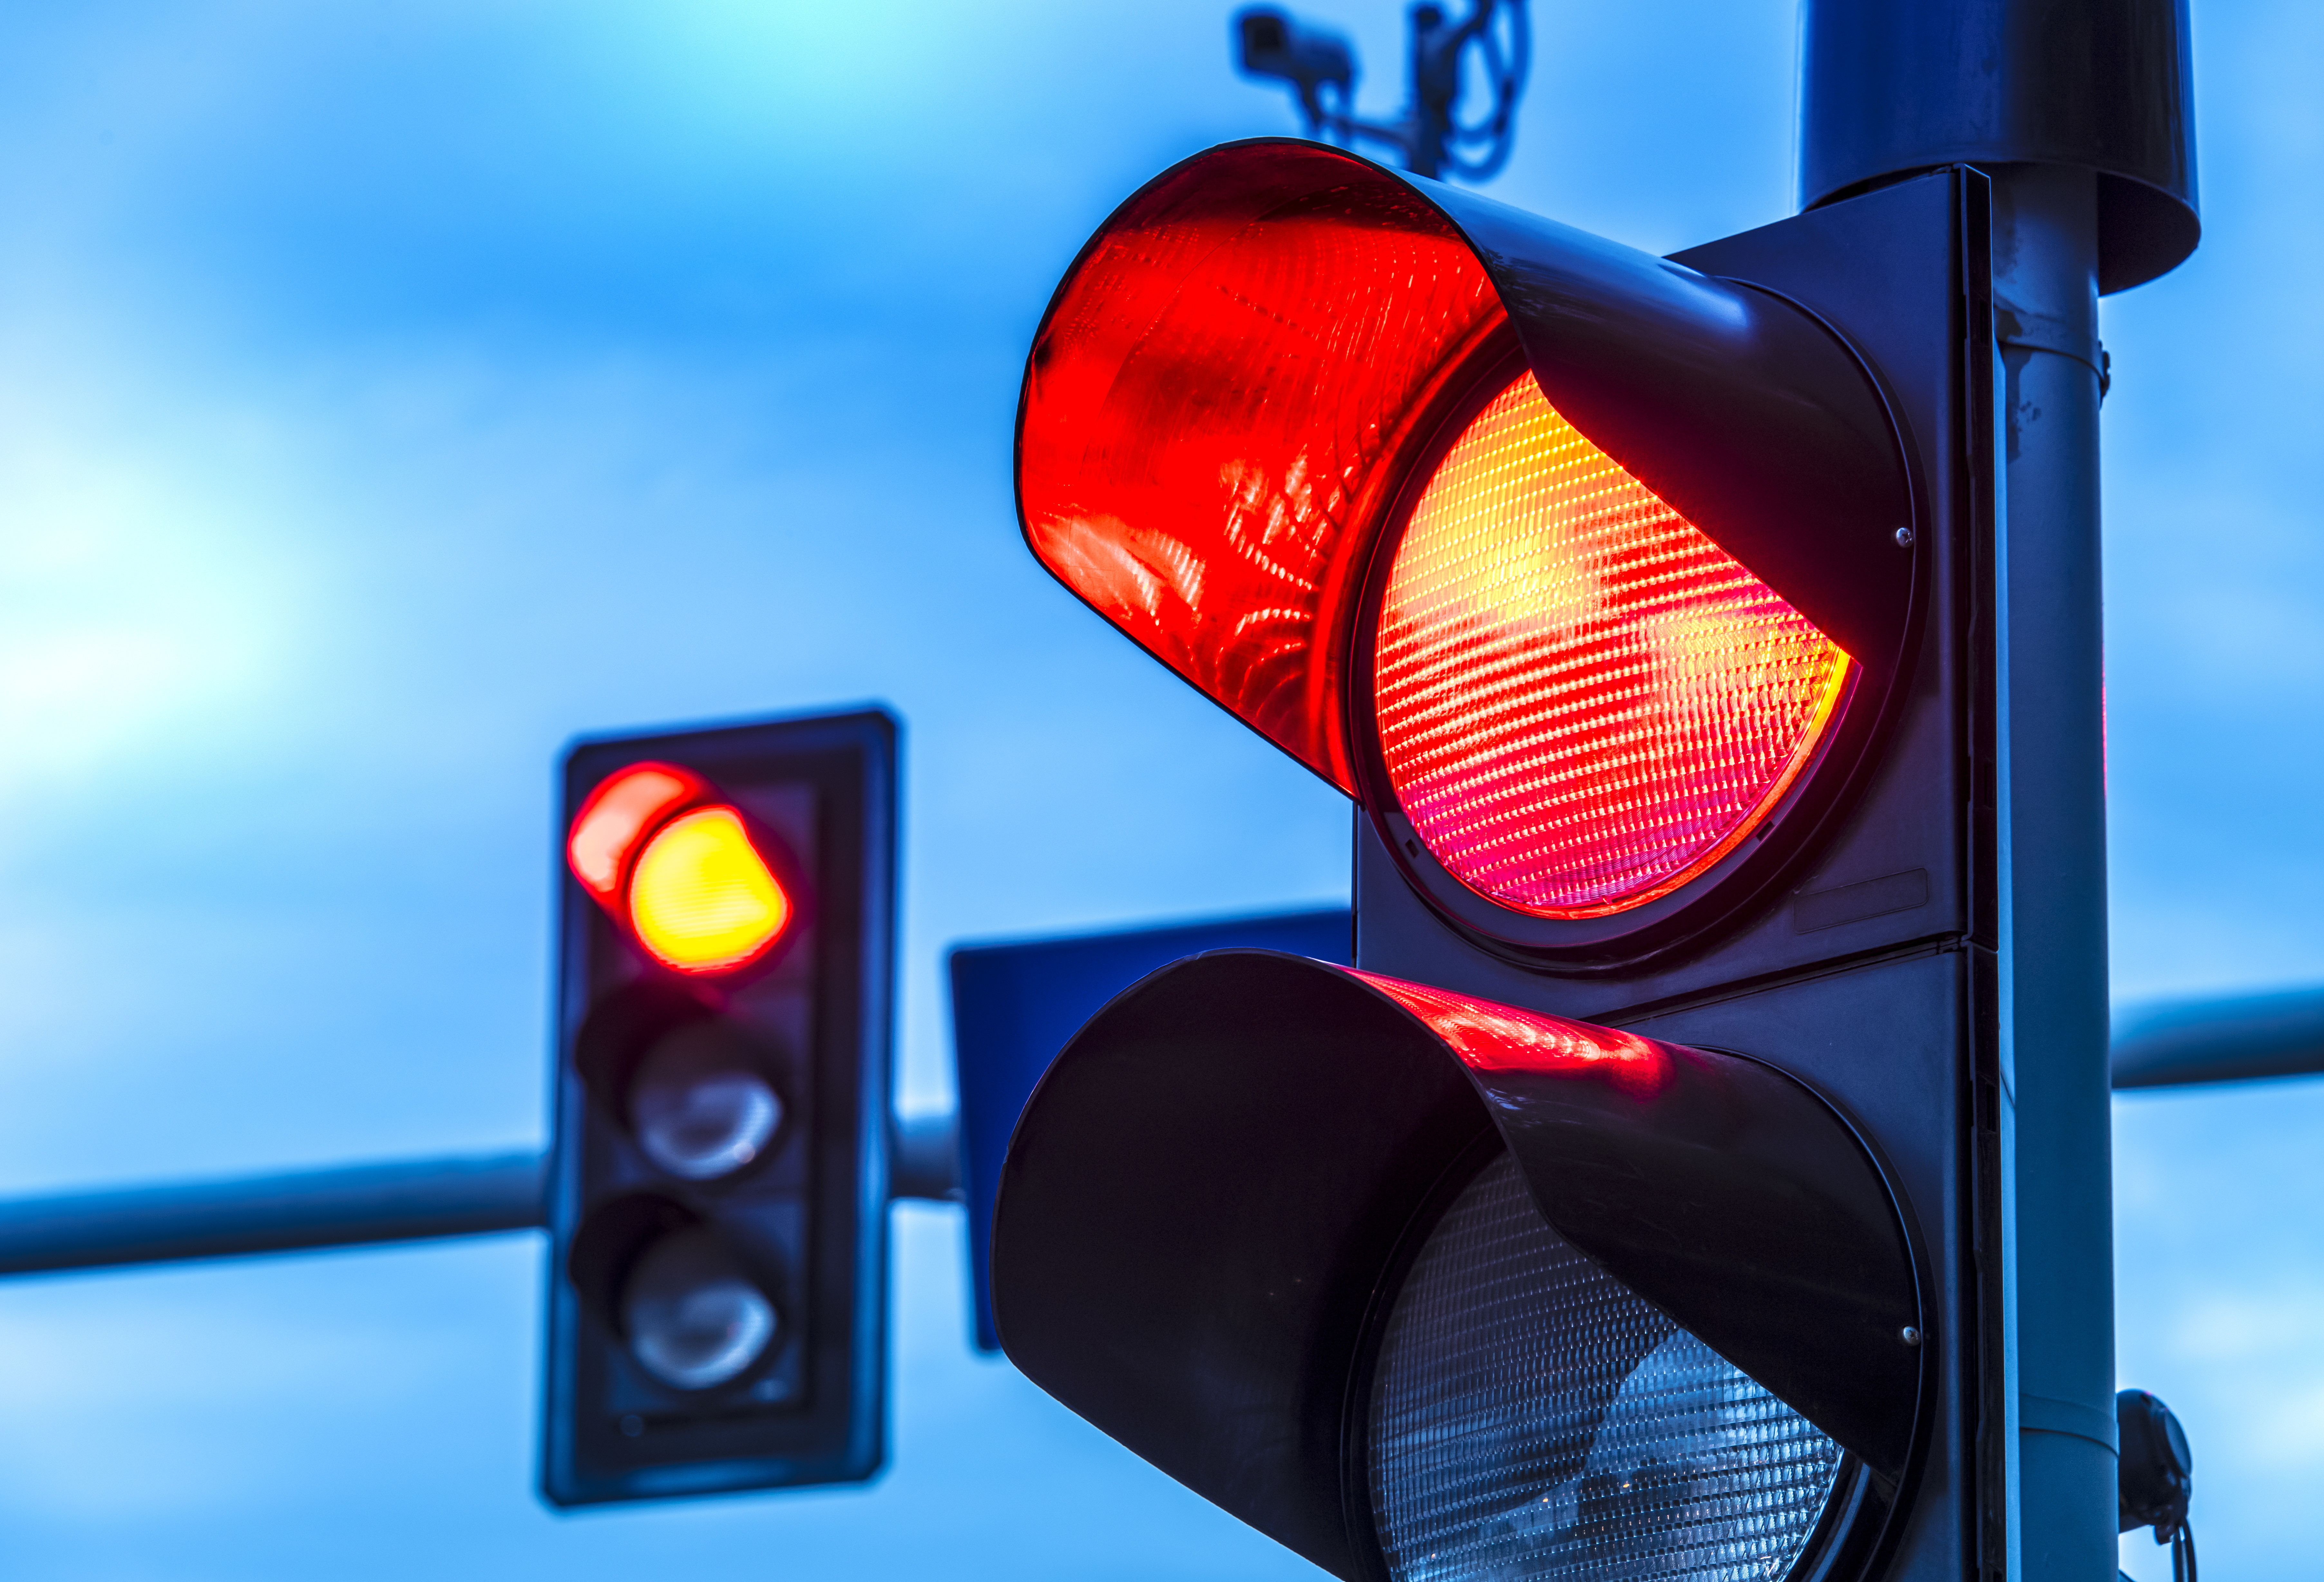 Debunking 5 Myths About Red Light Cameras